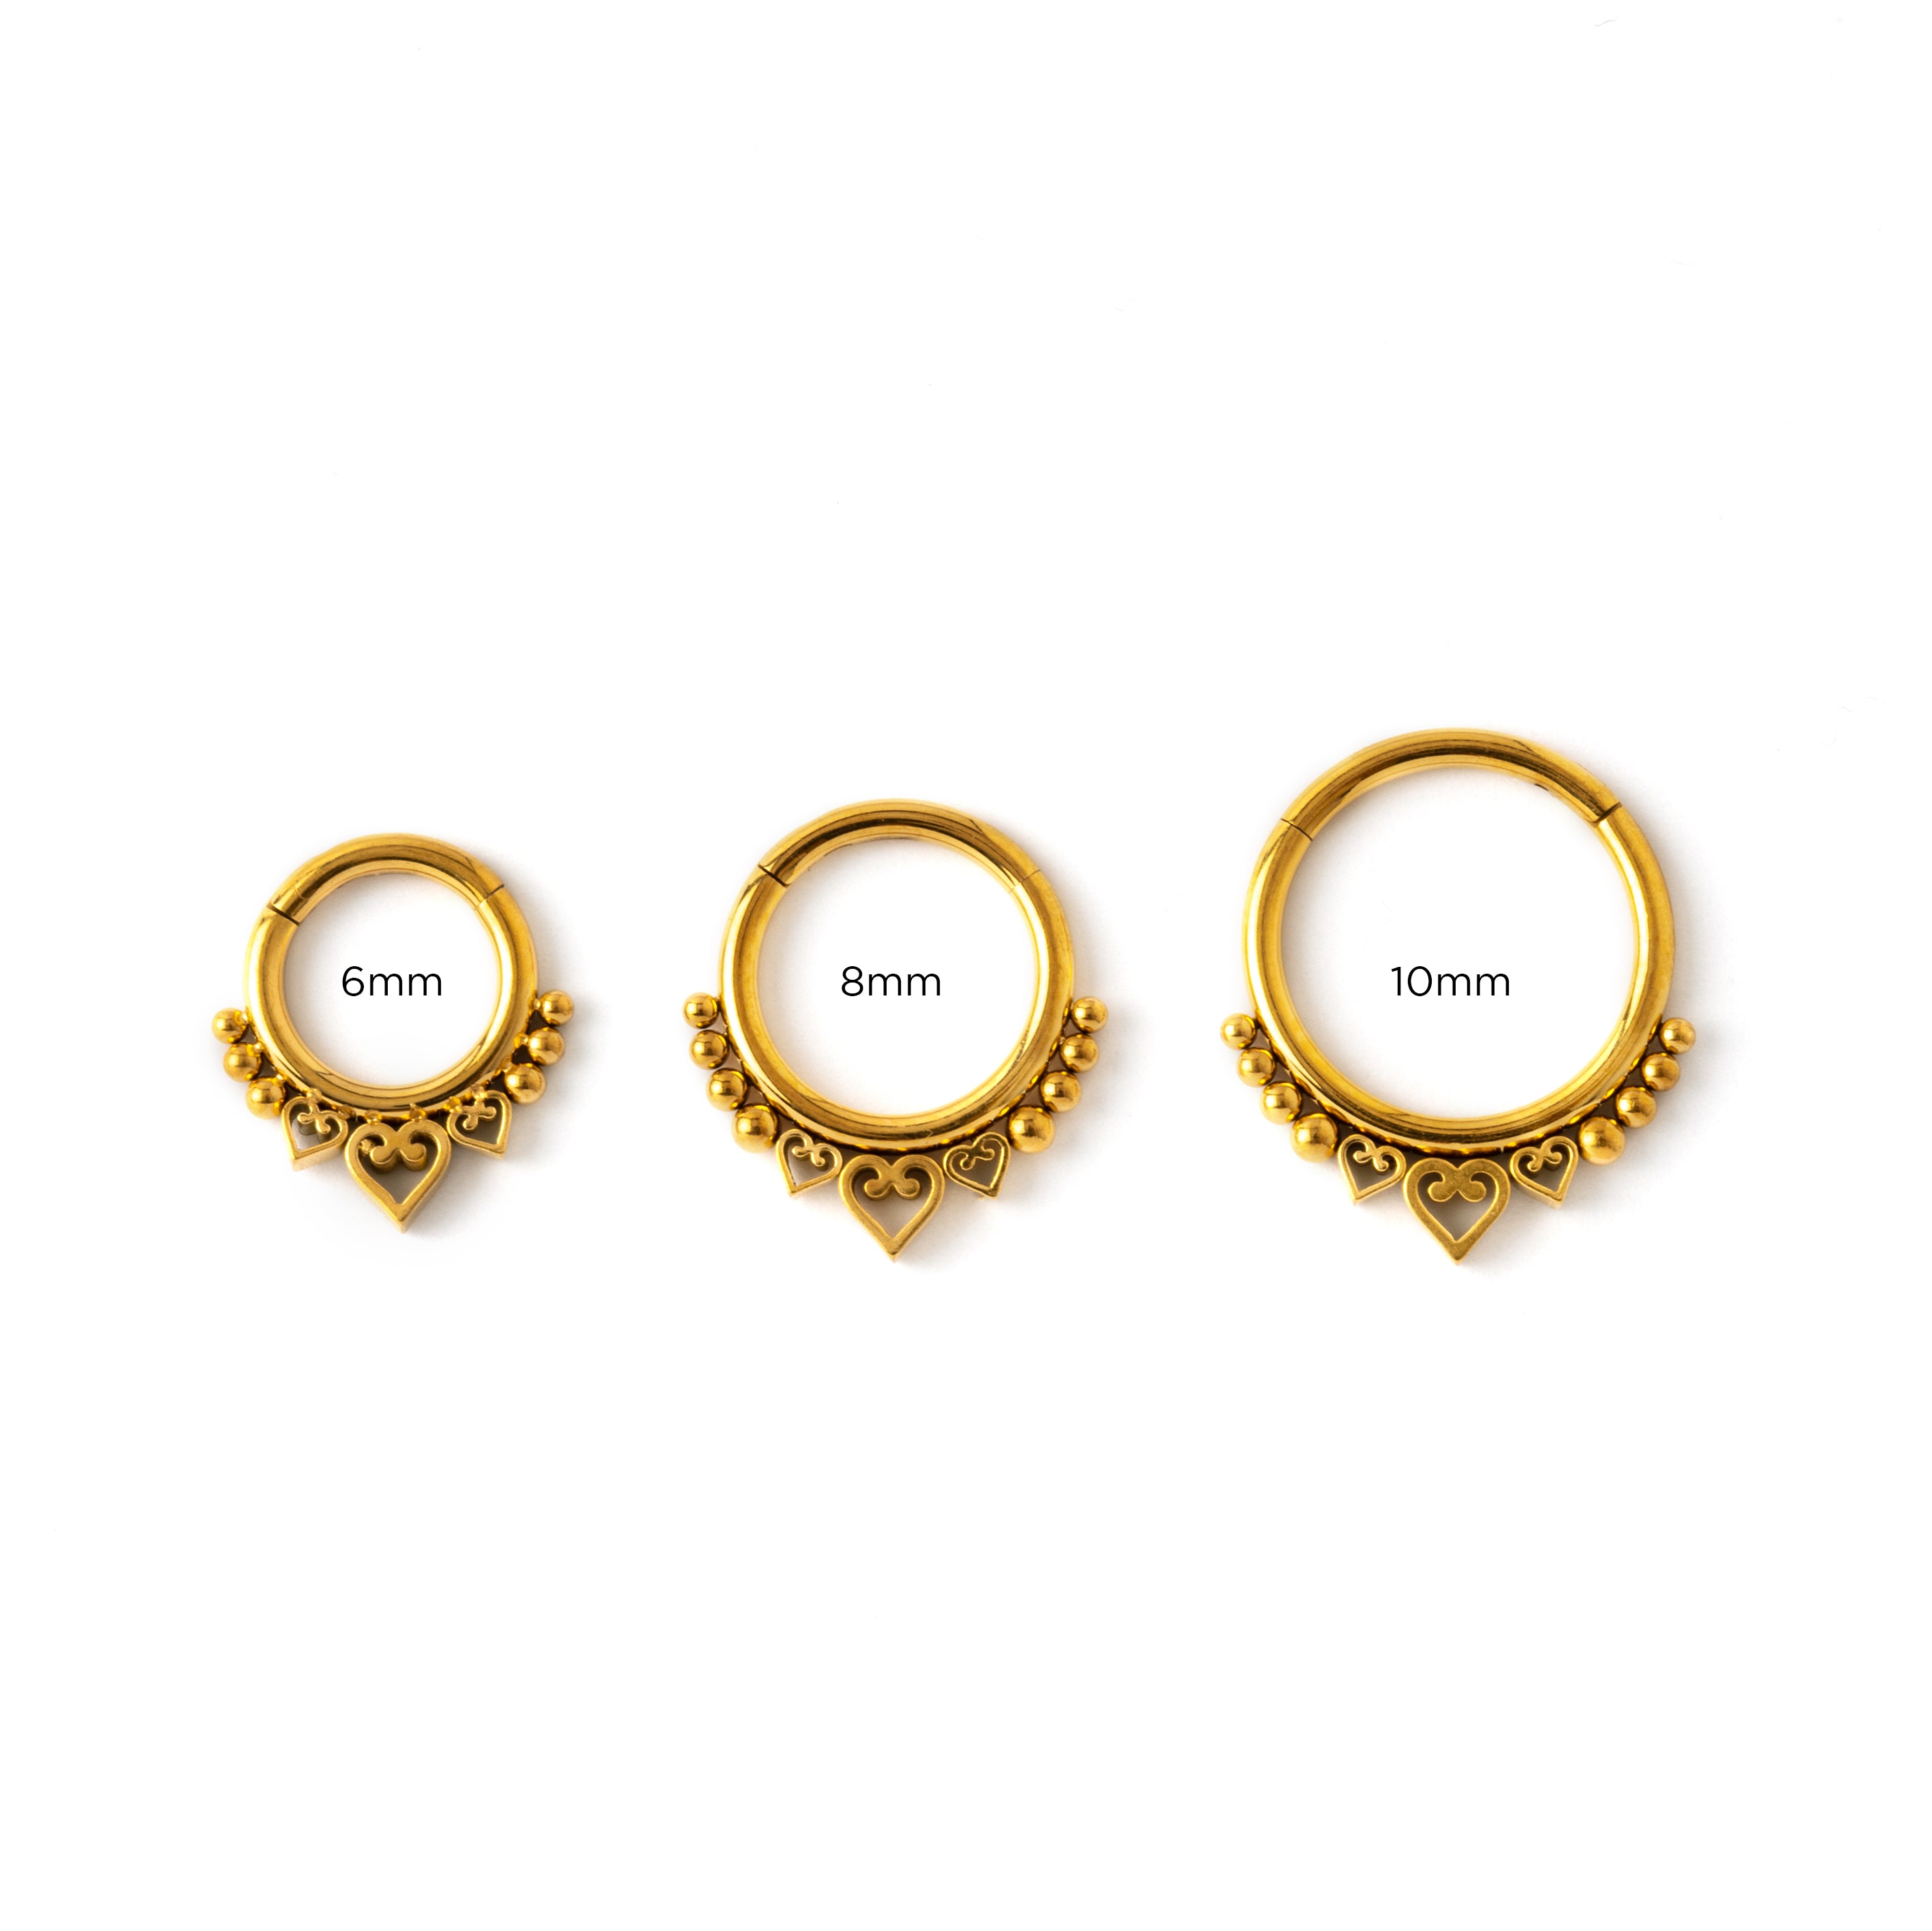 6mm, 8mm &amp; 8mm Golden Neptune Septum Clickers frontal view